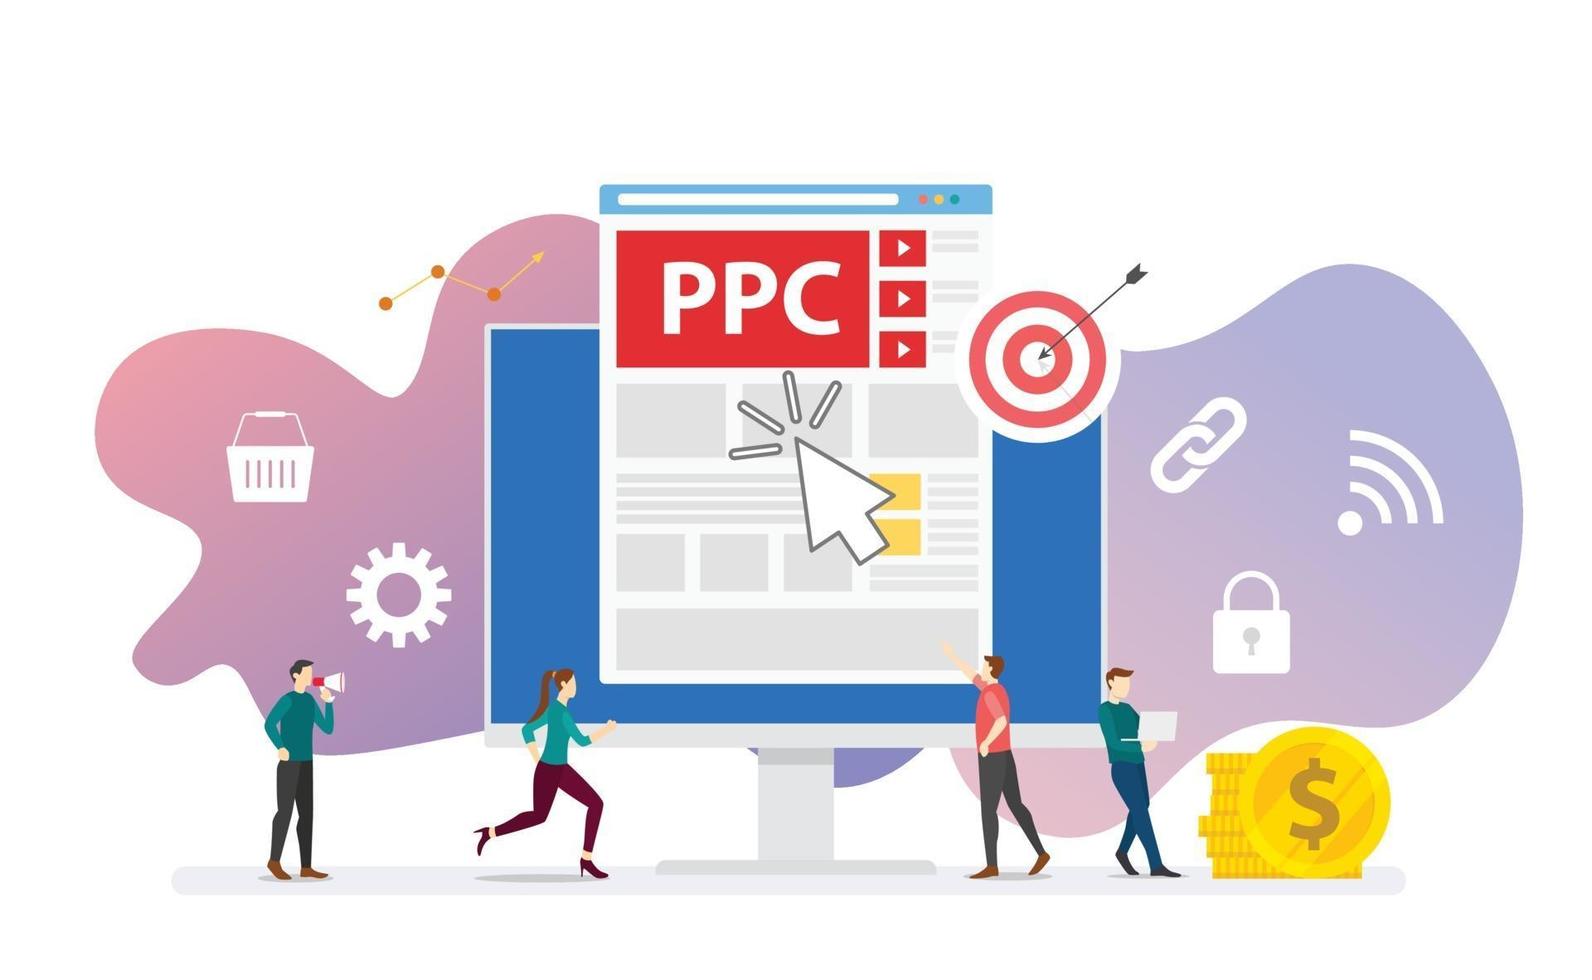 ppc pay per click technology advertising or advertisement concept vector